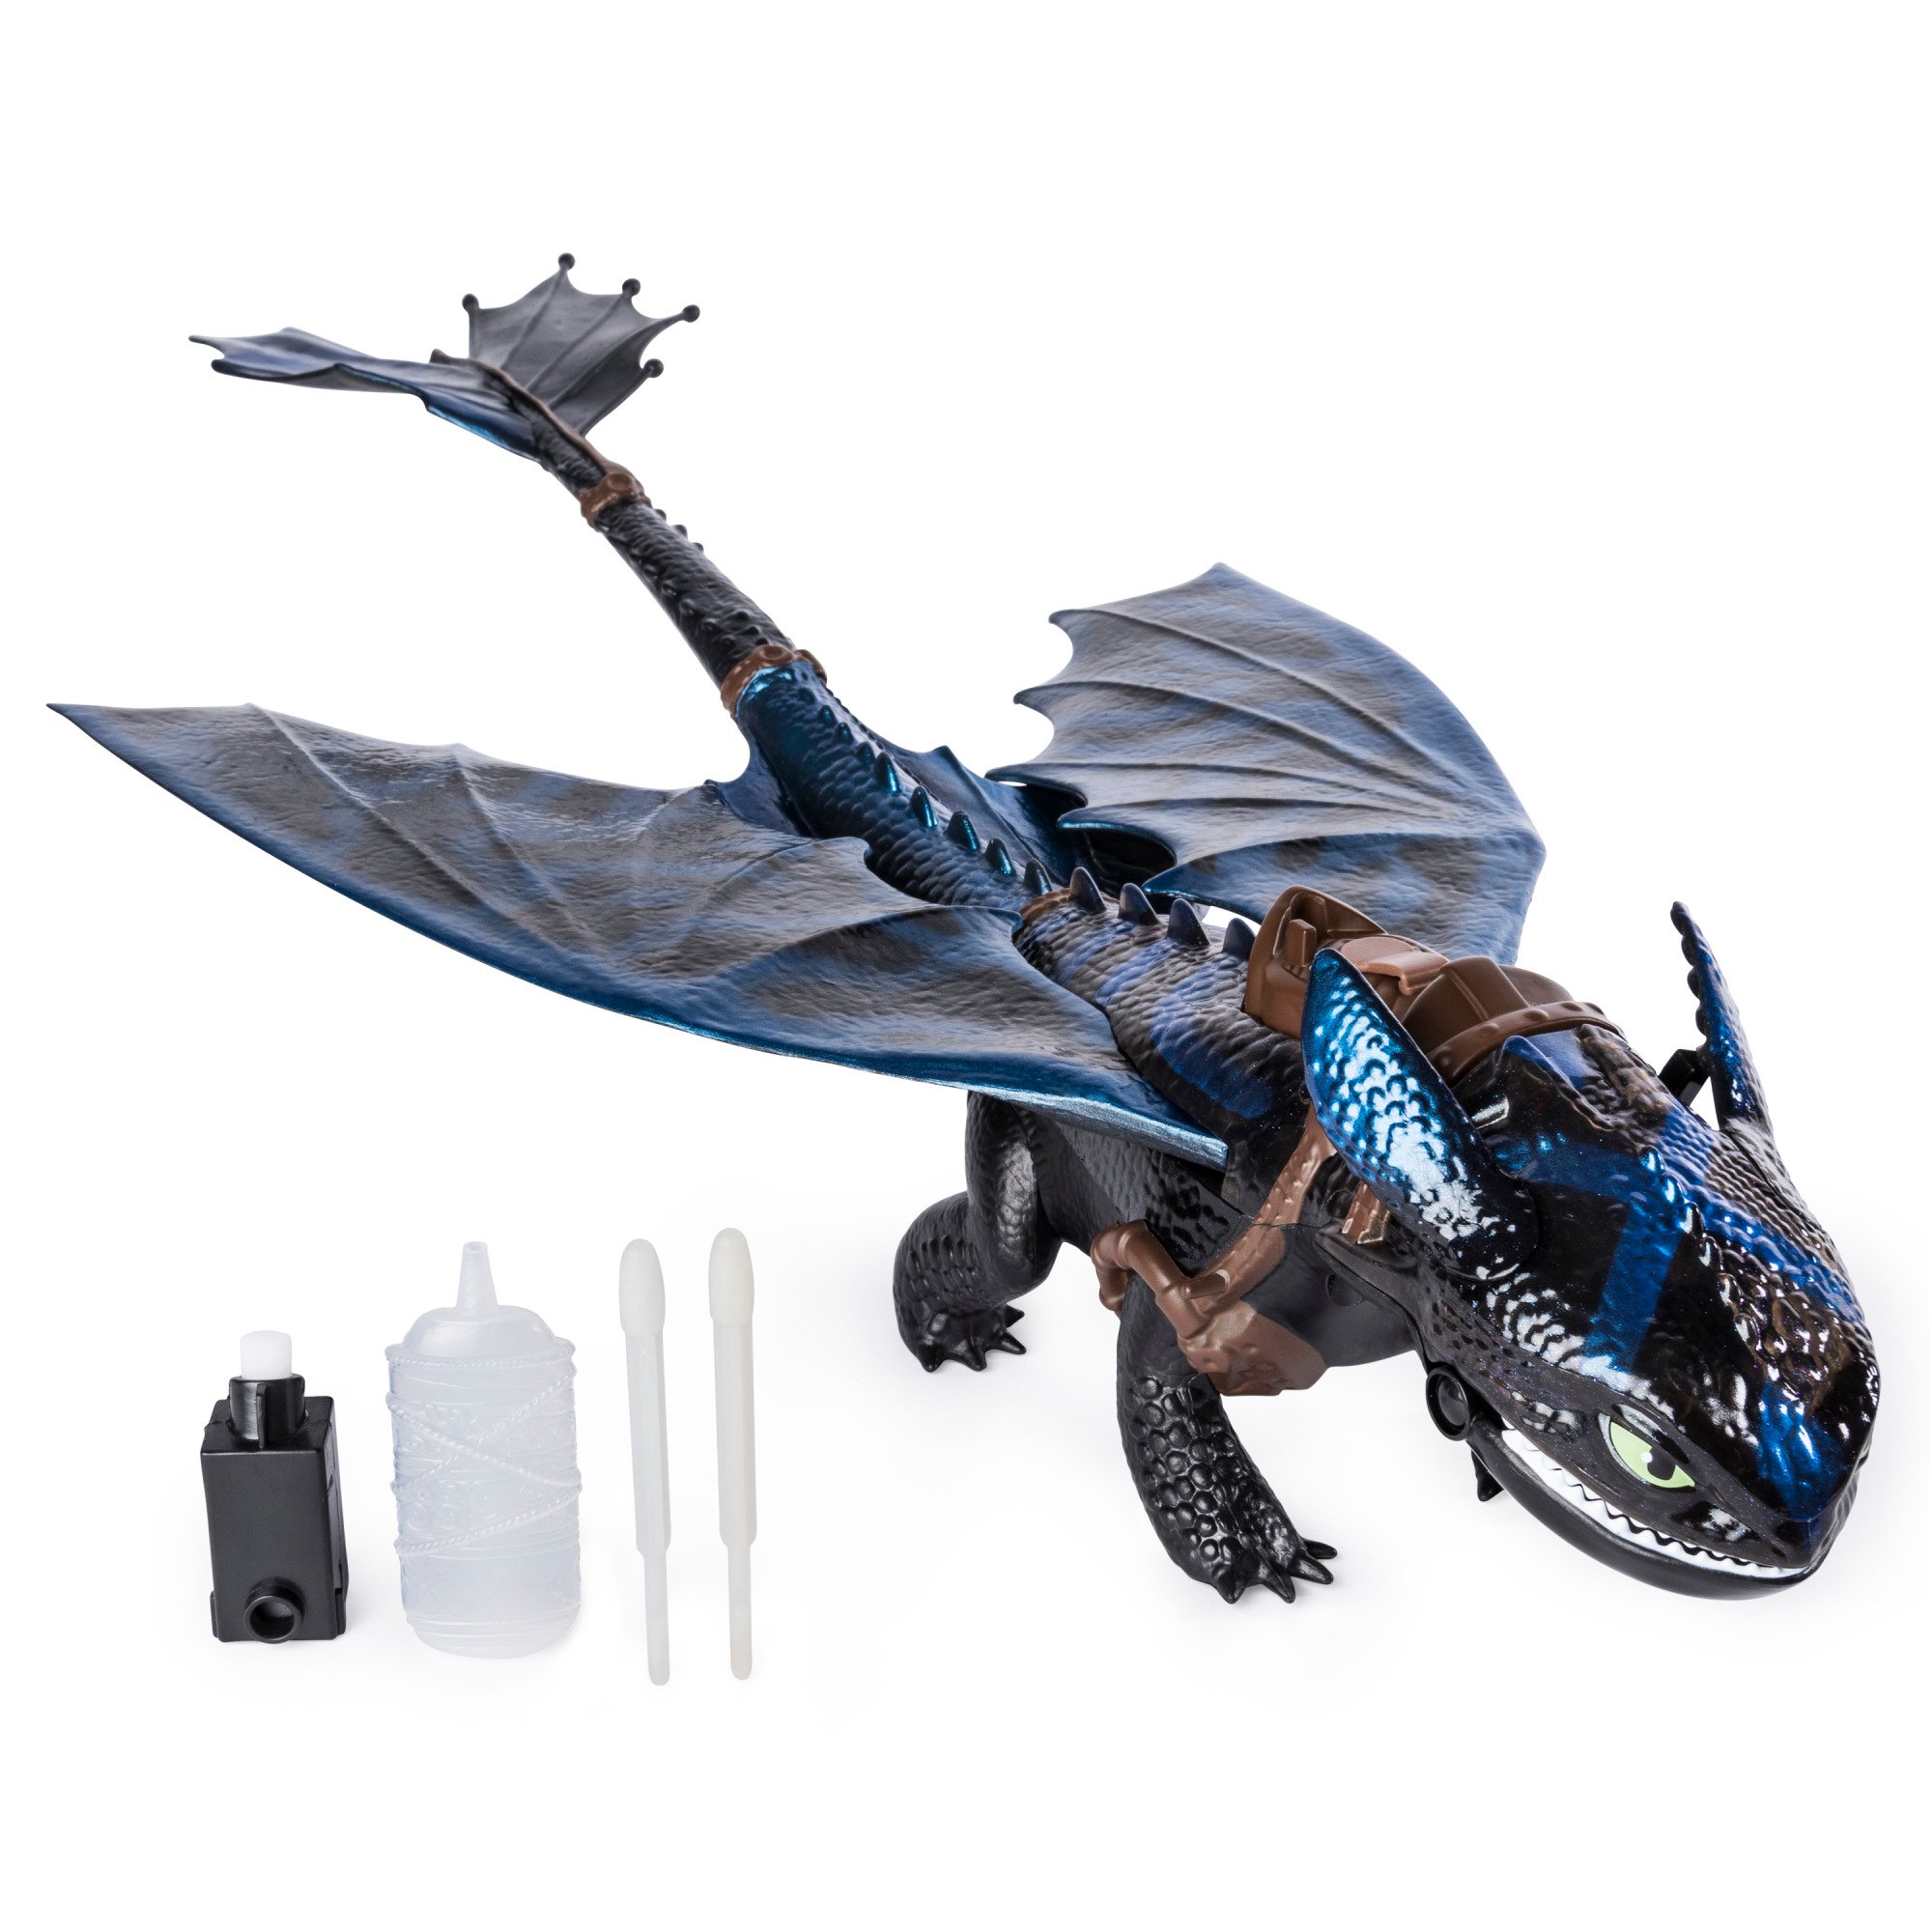 How To Train Your Dragon - Fire Breathing Toothless (6045436)